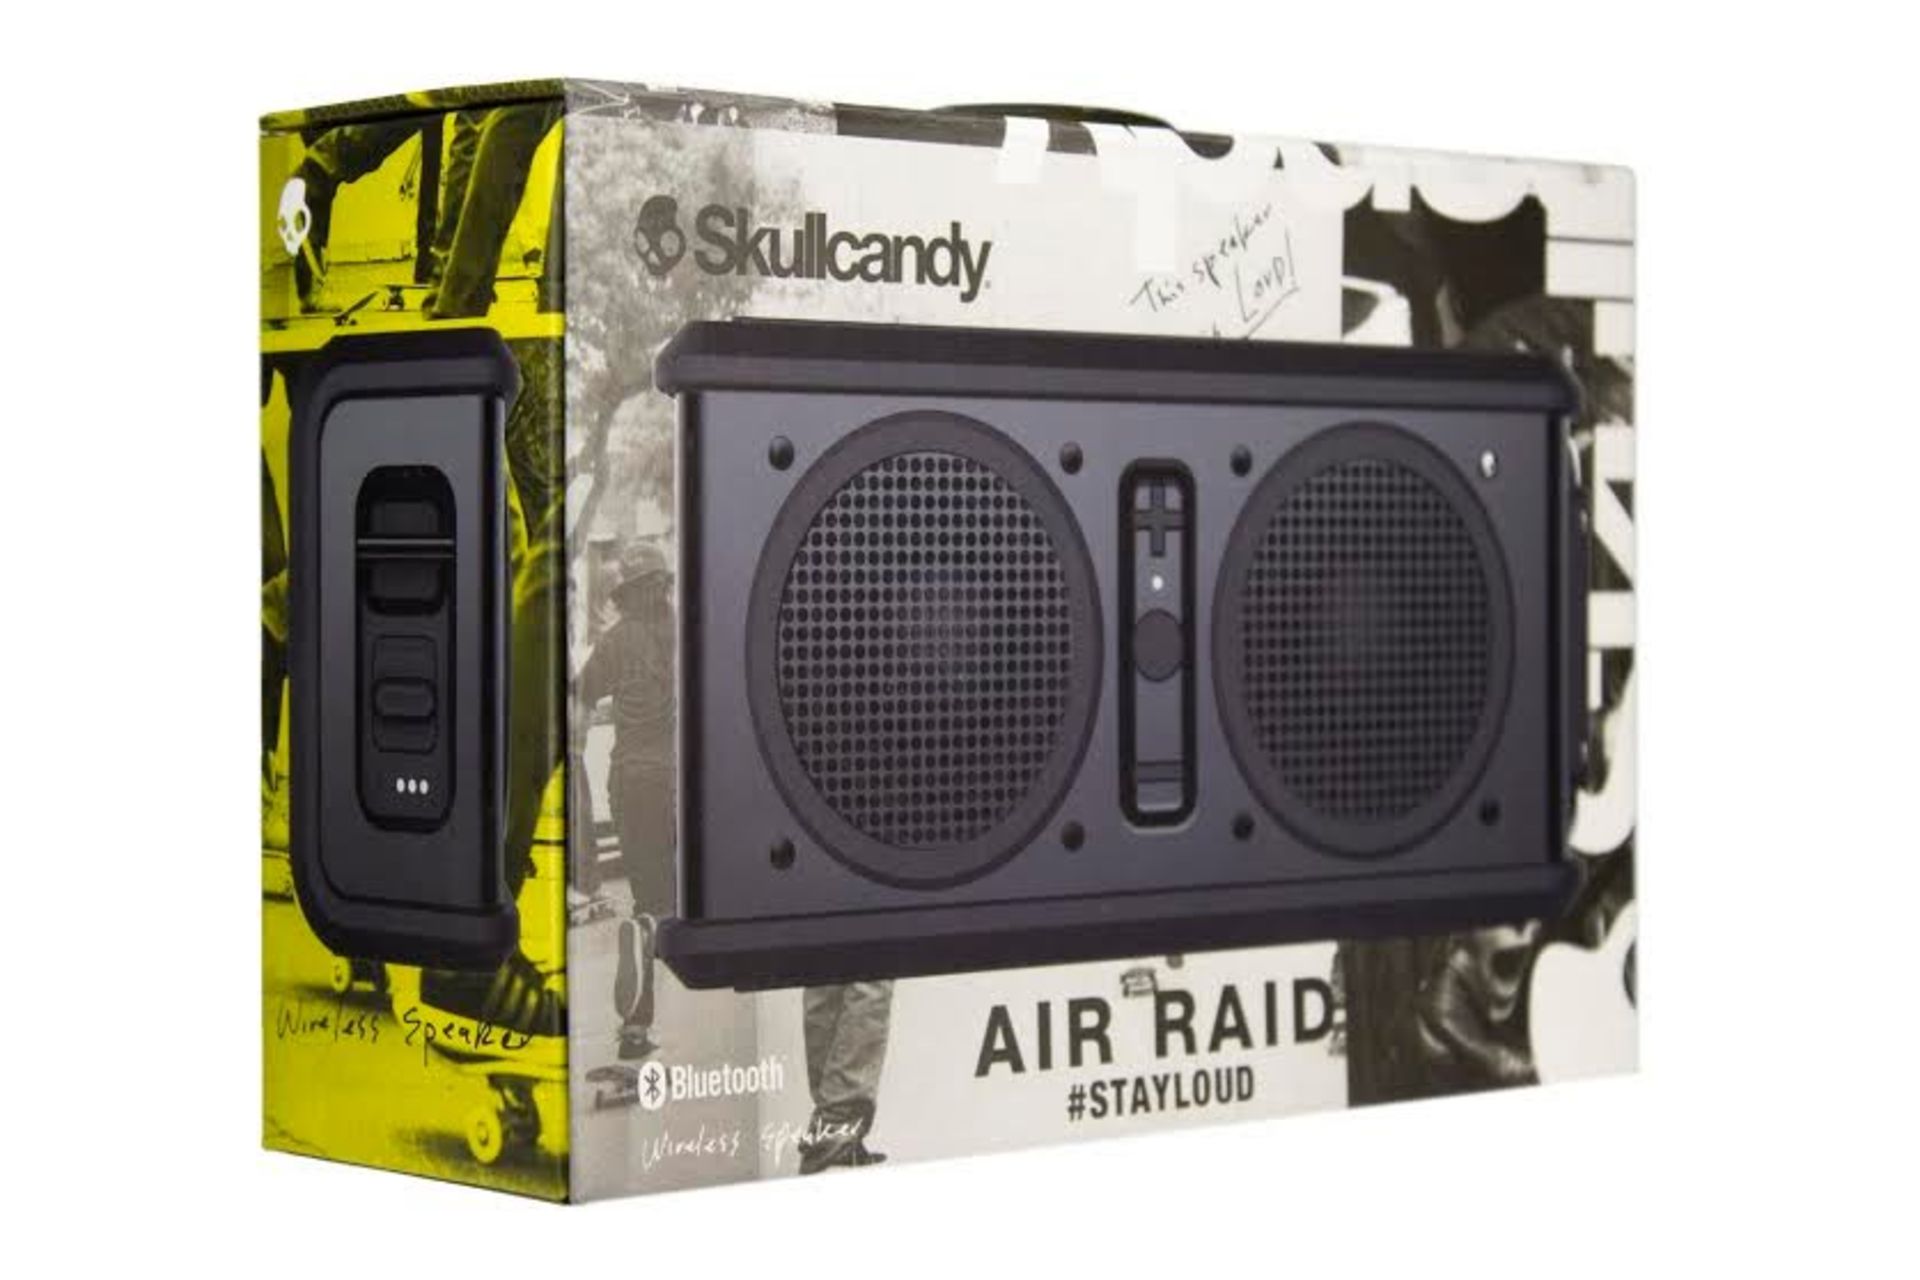 V Brand New Skull Candy Air Raid #Stayloud Bluetooth Wireless Water Resistant Speakers - Up To 10 - Image 2 of 2